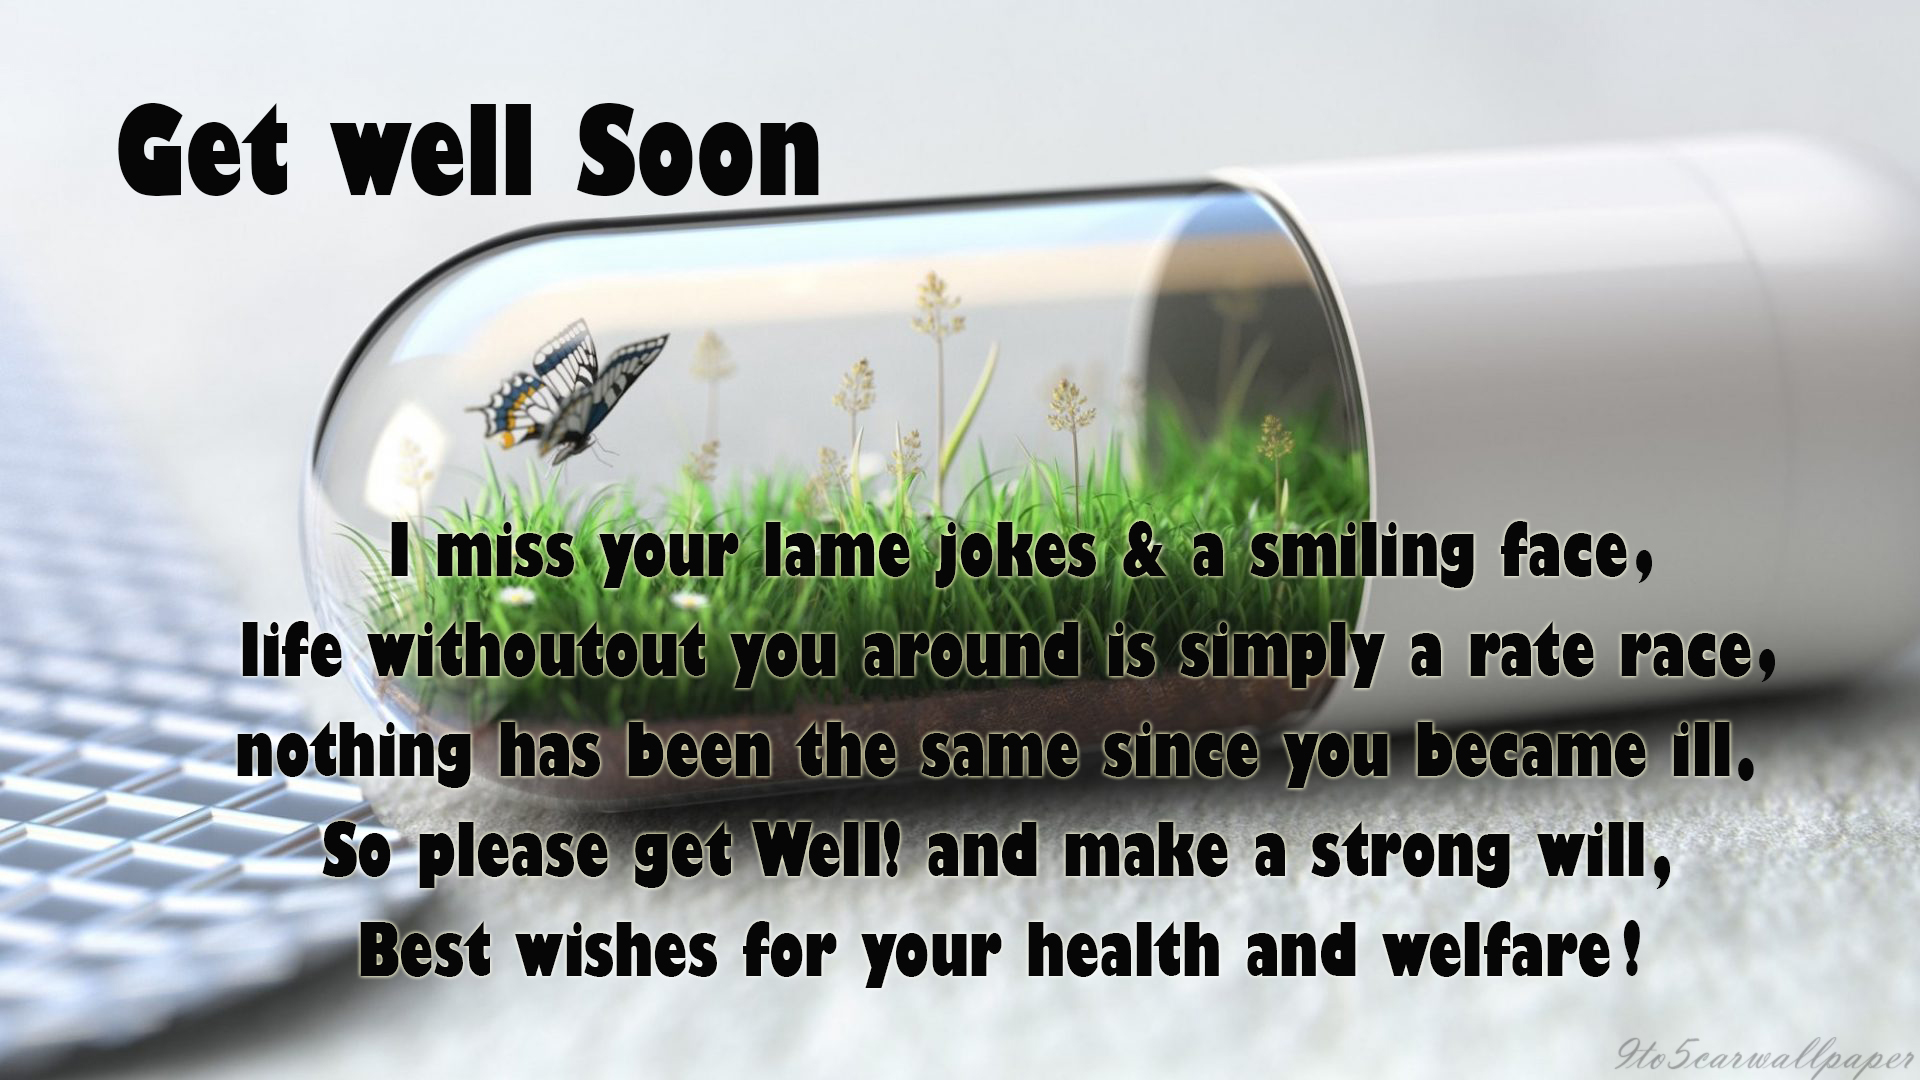 get-well-soon-quotes-wishes-cards-posters